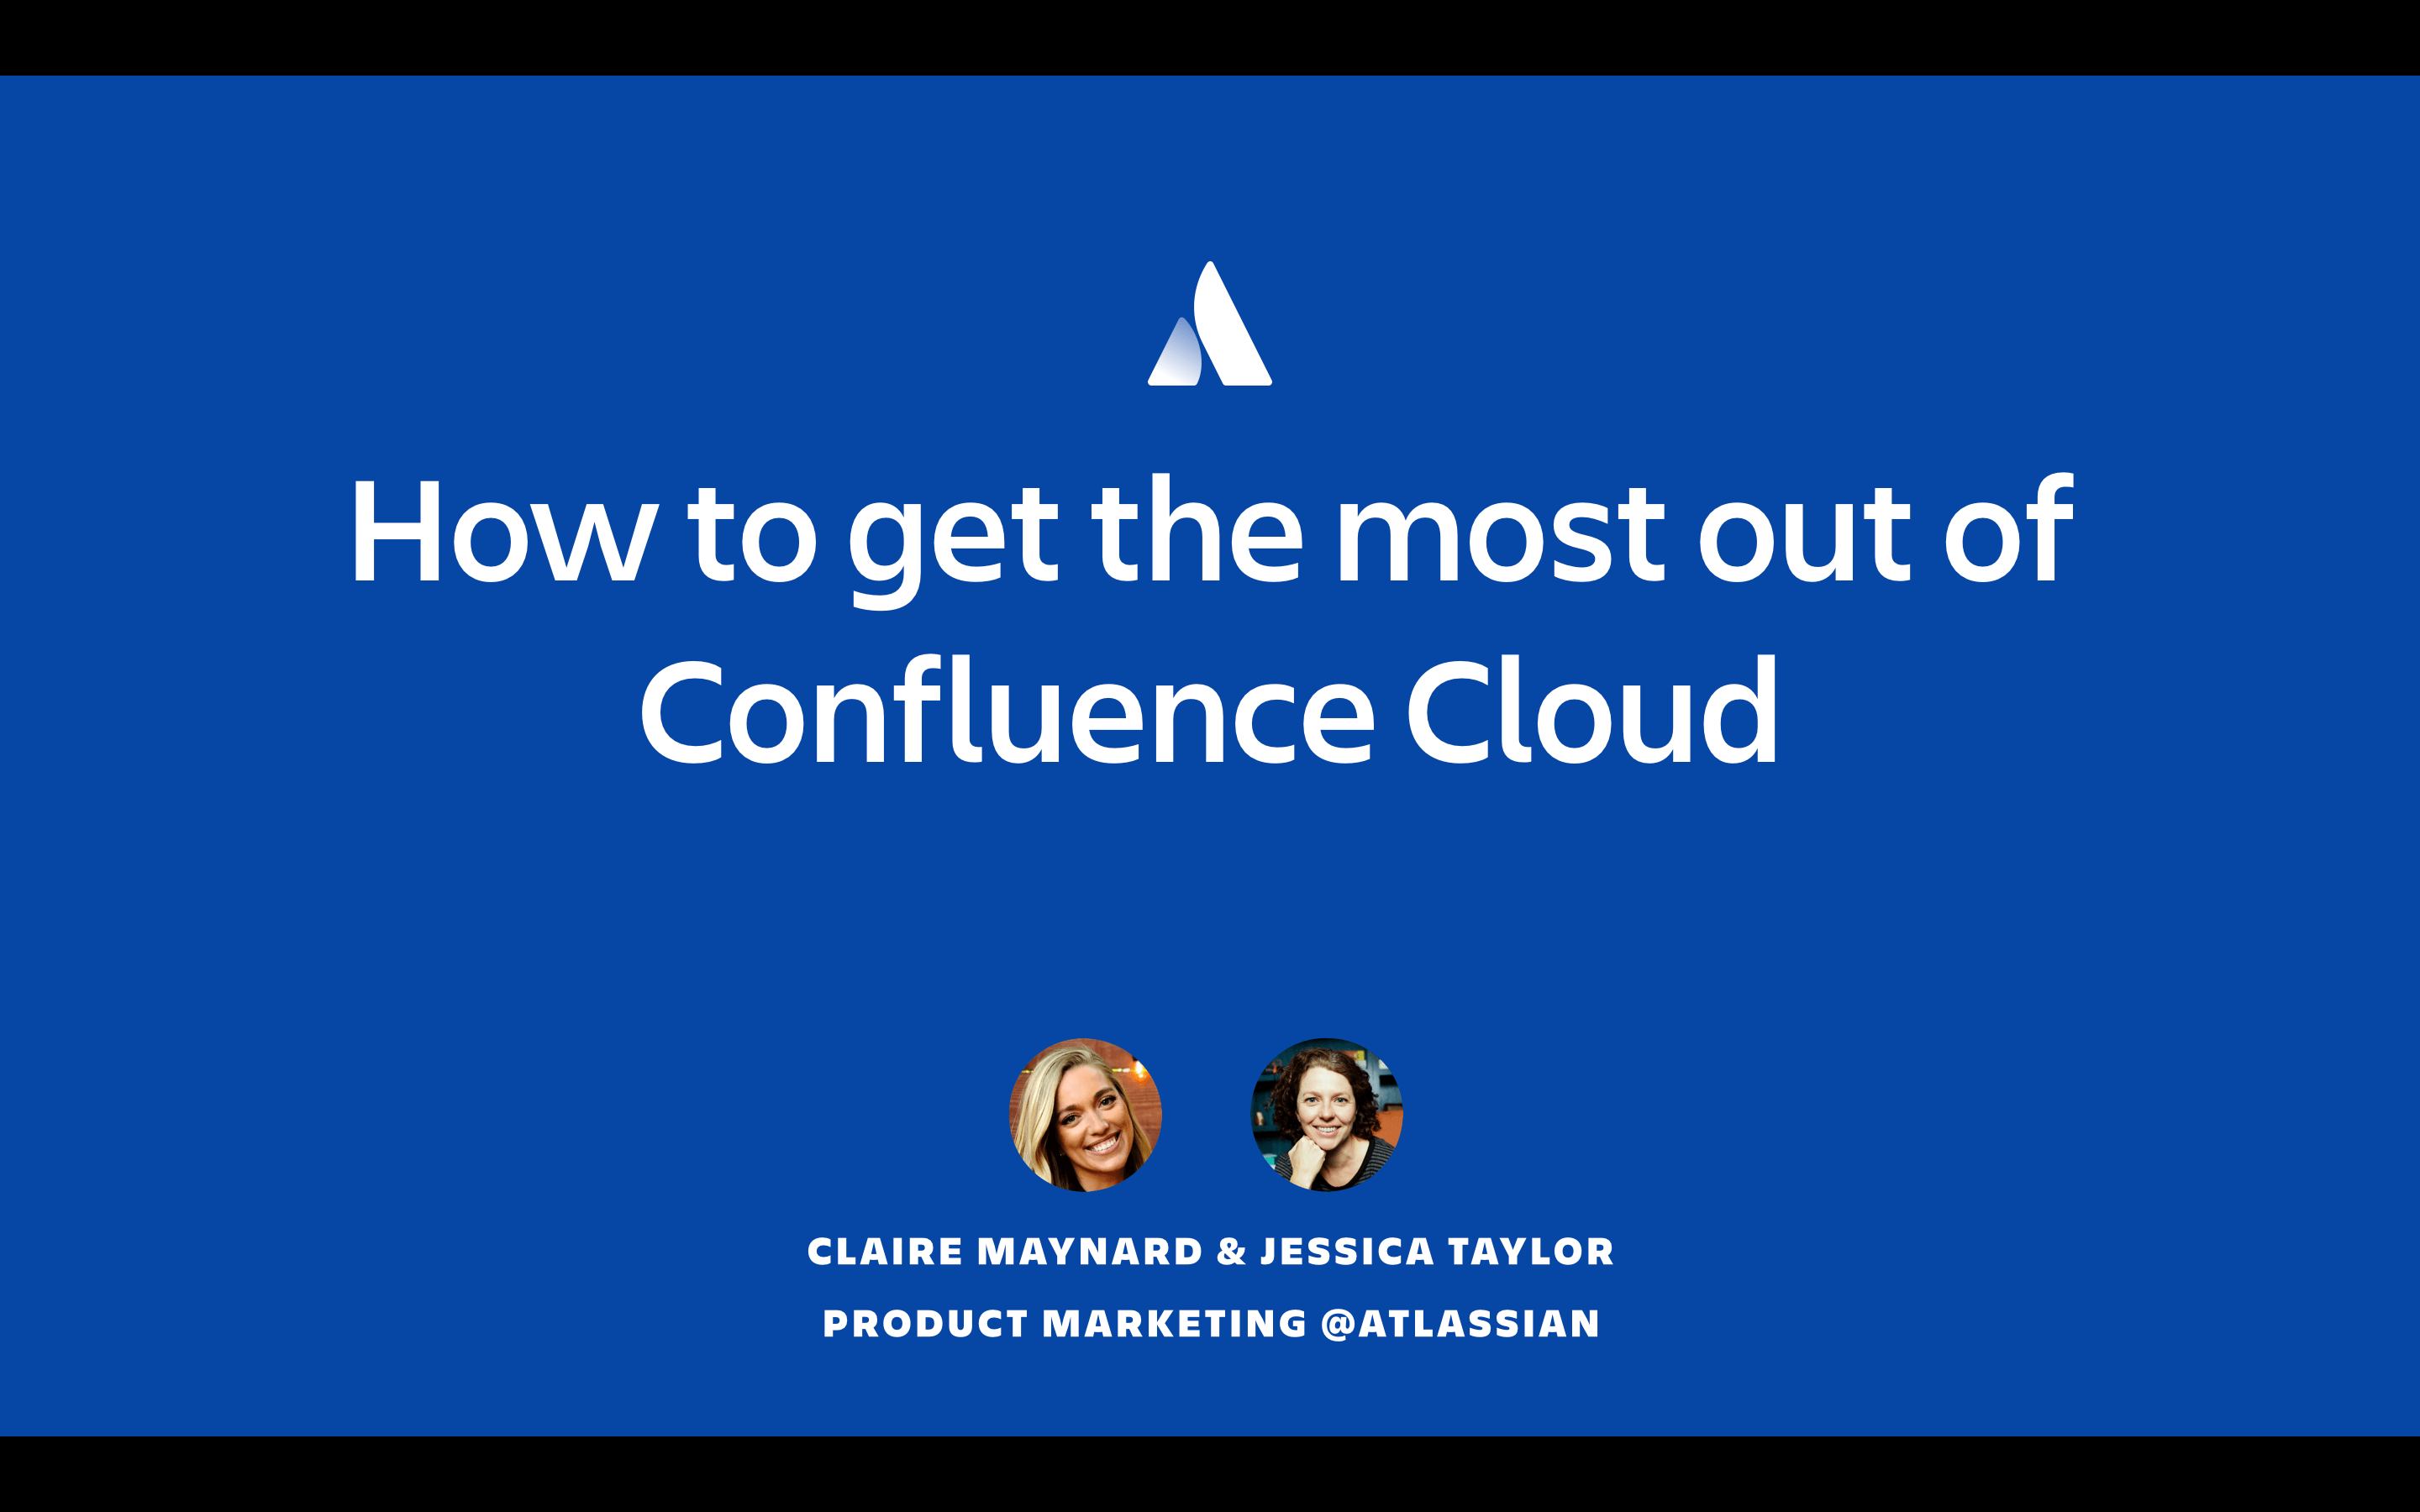 How to get the most of out Confluence Cloud thumbnail